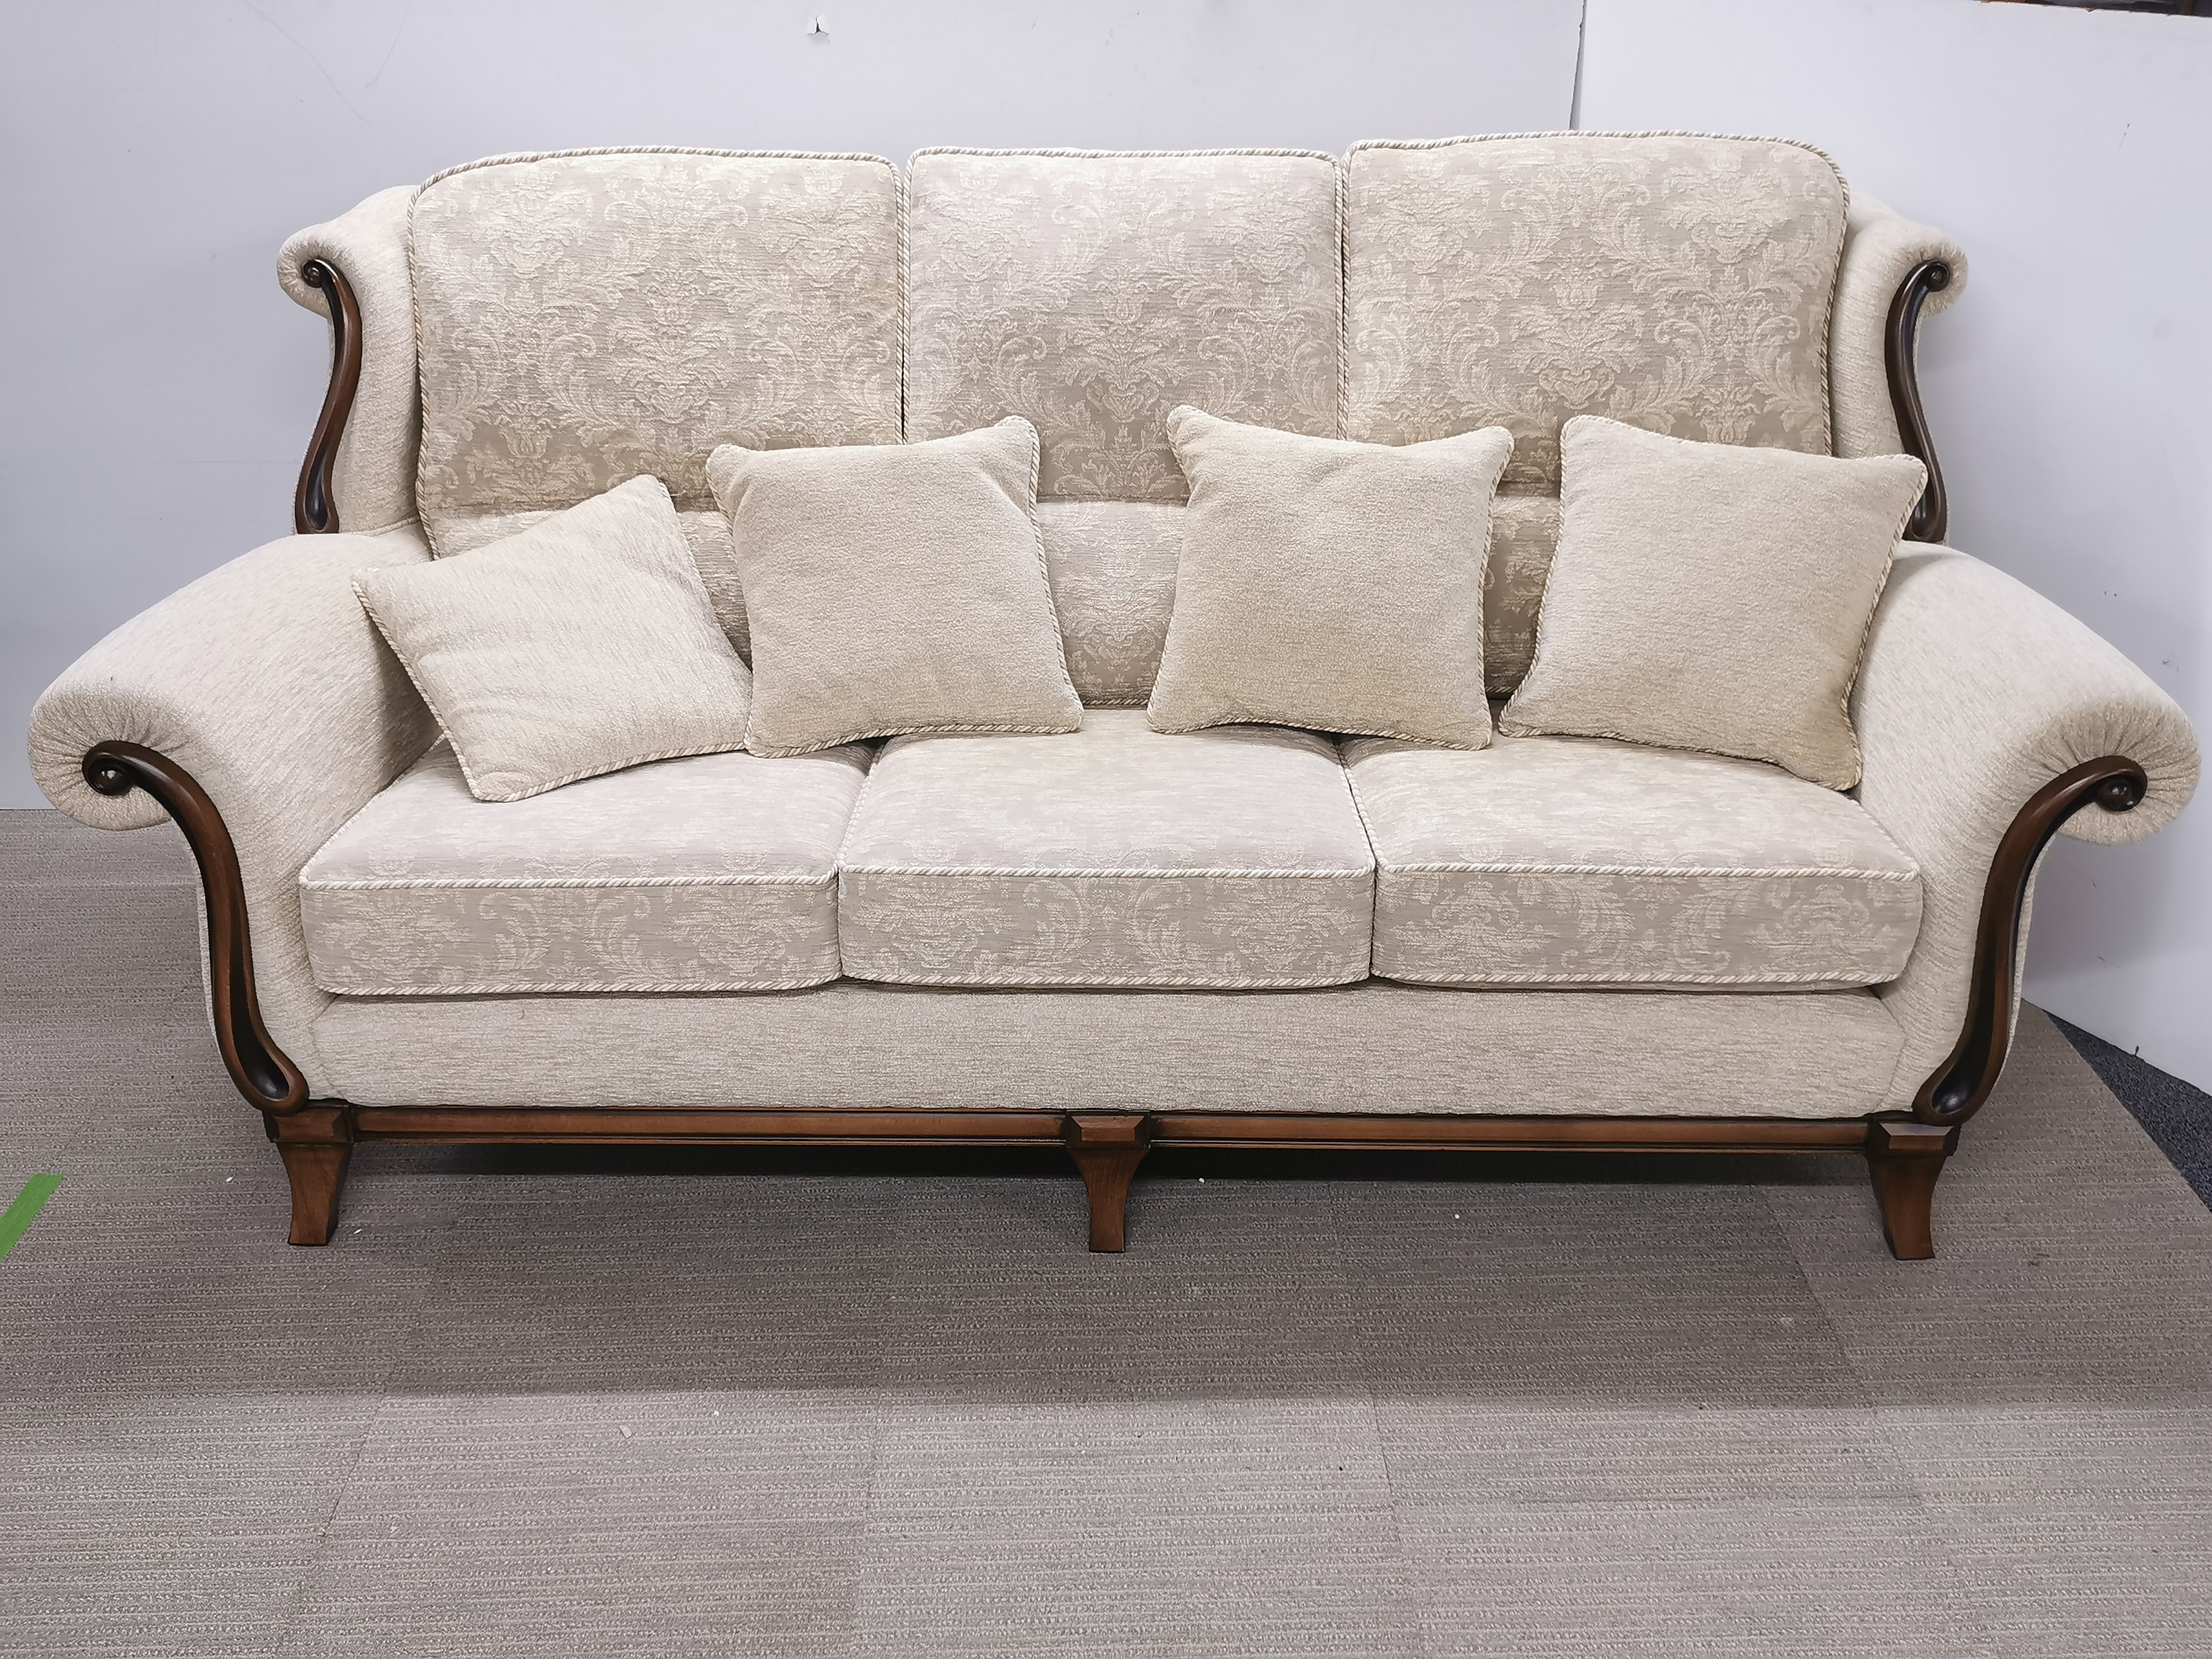 A heavy quality cream upholstered settee with a matching armchair and an Ercol footstool. - Image 2 of 5